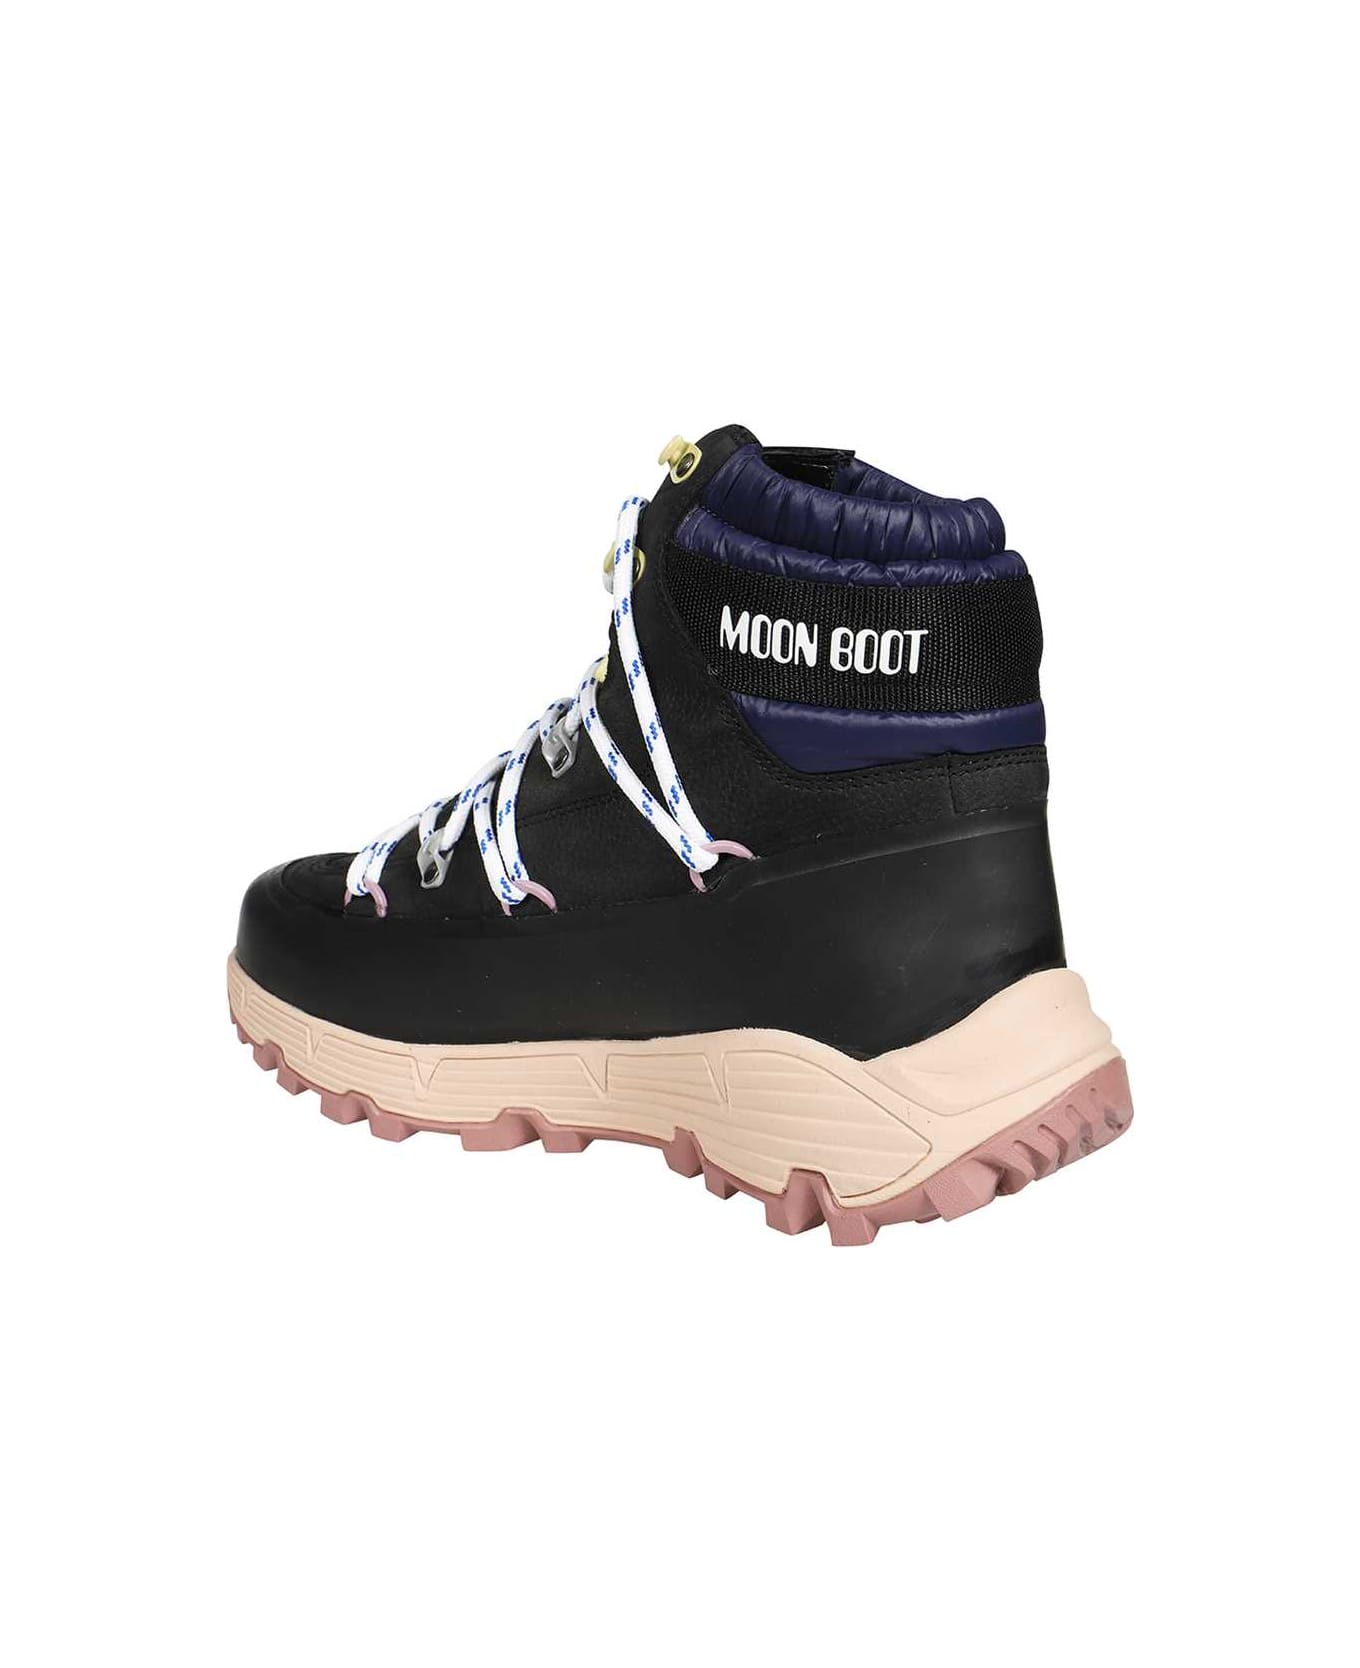 Moon Boot Lace-up Ankle Boots - blue ブーツ